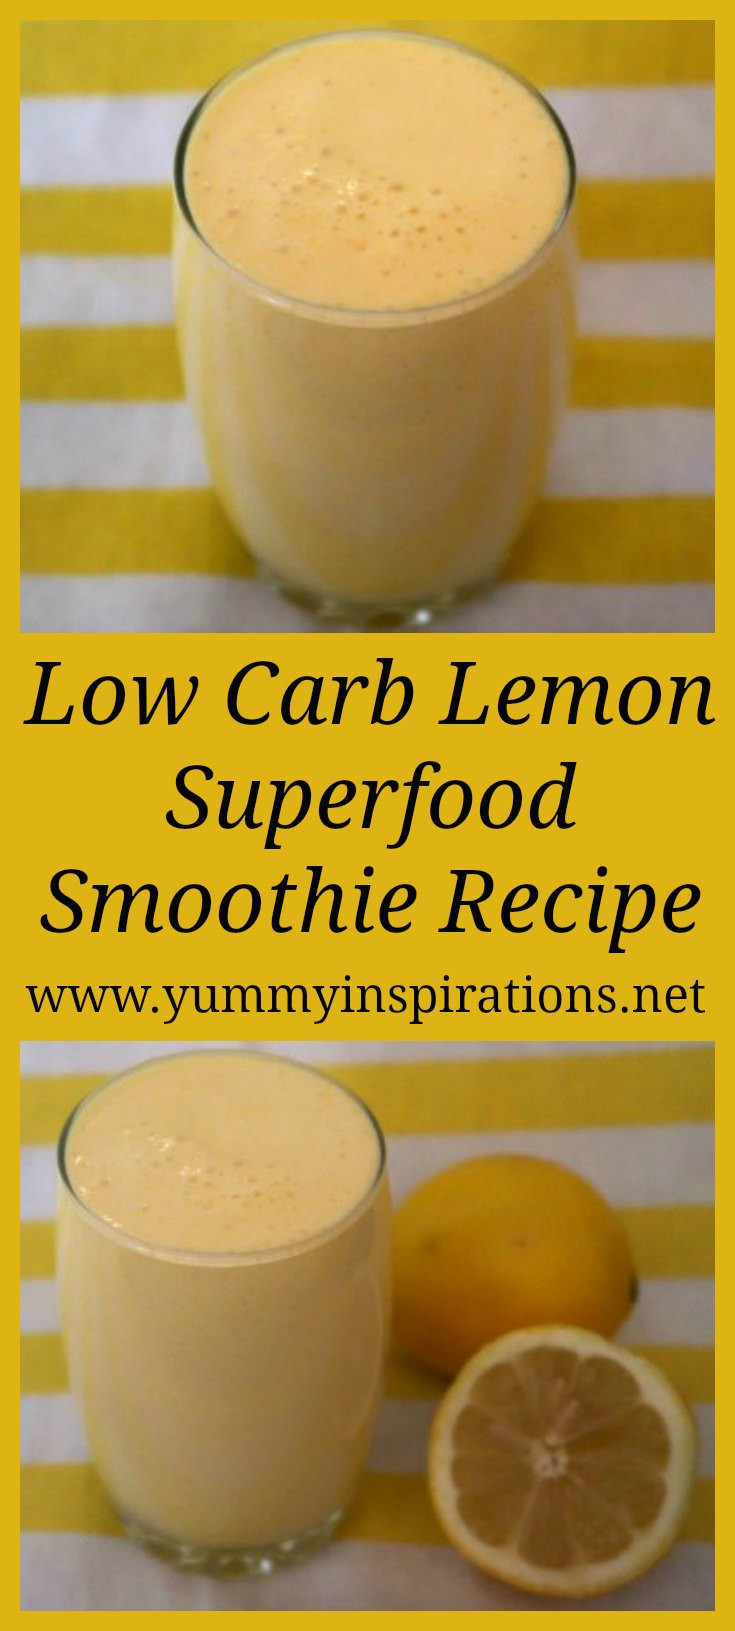 Superfood Smoothie Recipes
 Lemon Superfood Smoothie Recipe Easy Low Carb Smoothies